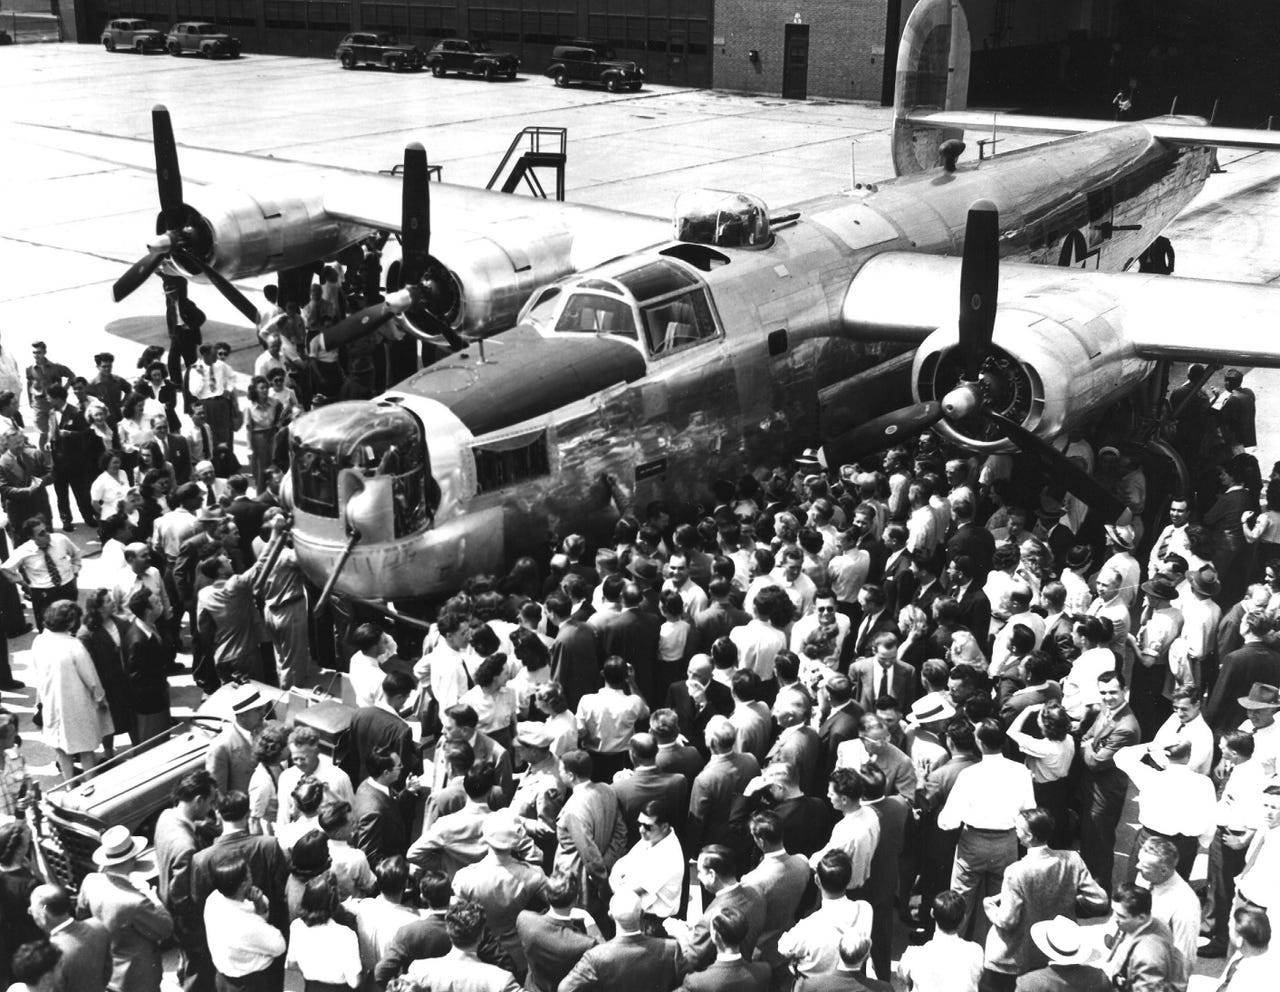 The last bomber rolled off the line June 25, 1945. The plane was to be christened "The Henry Ford," but Ford asked that his name be taken off and the plane be named after the workers who had built it. Here it's being autographed by the last remaining workers at Willow Run.